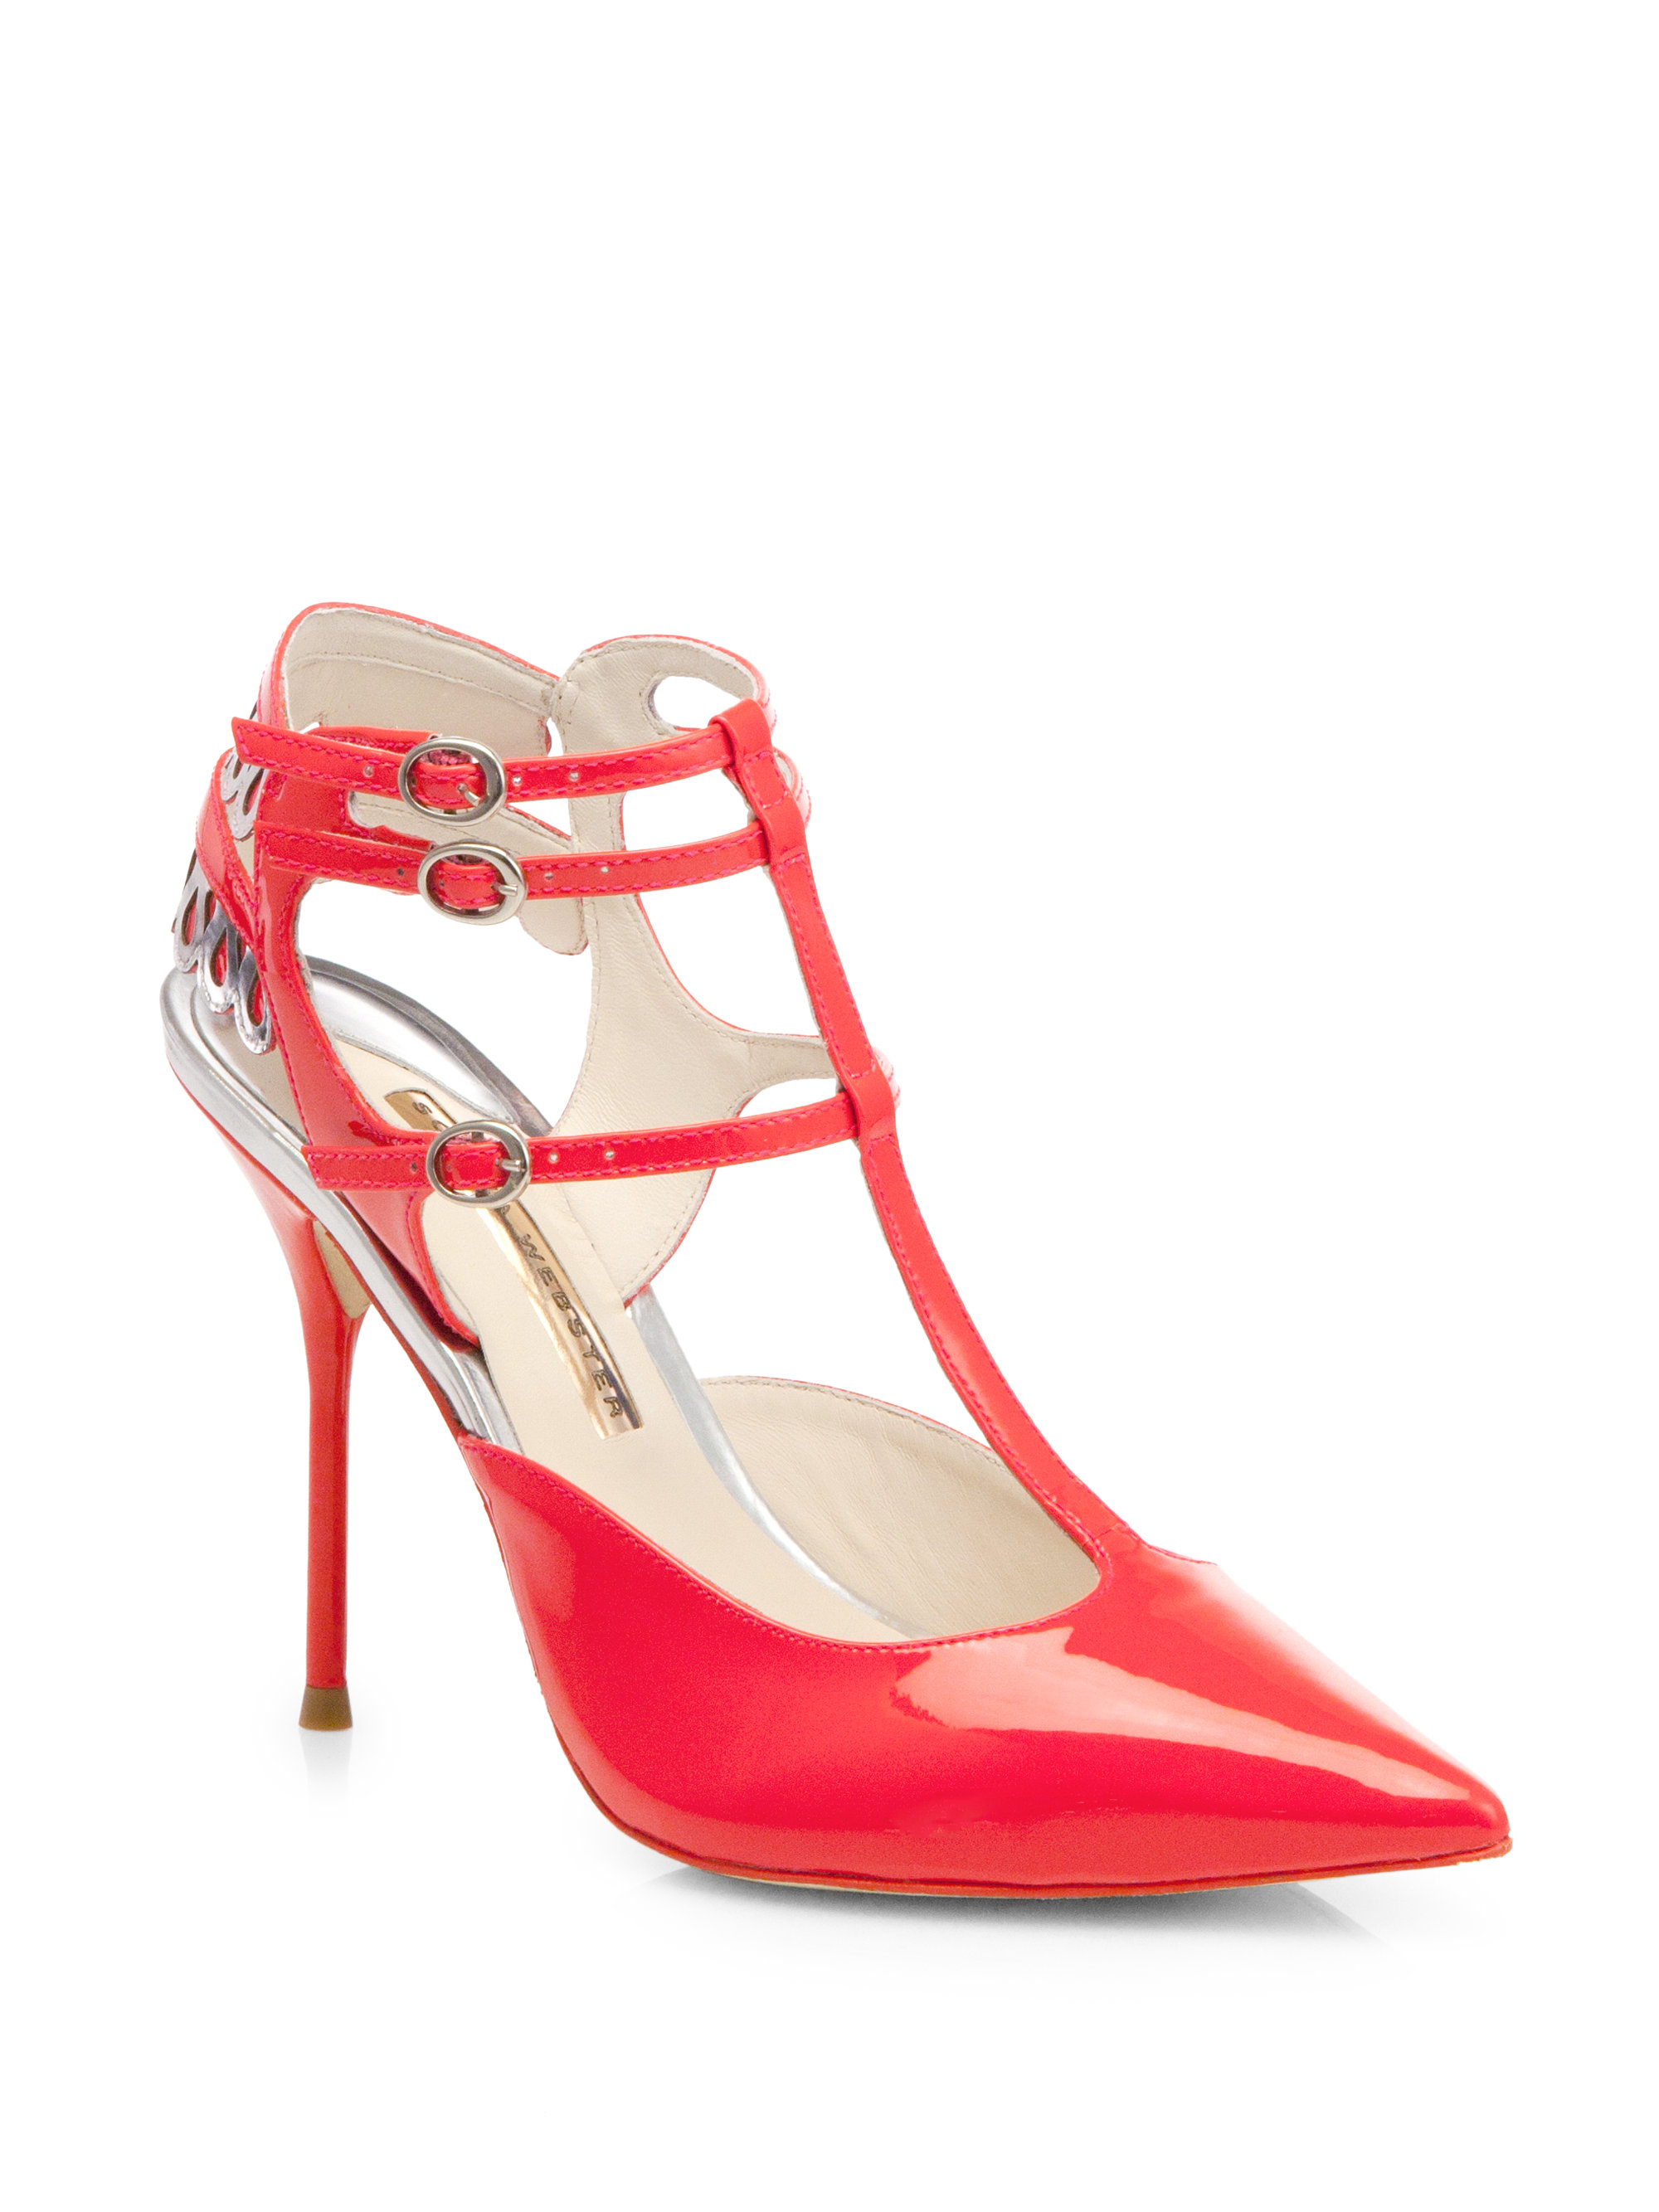 Sophia Webster Portia Tstrap Patent Leather Pumps in Red (PINK) | Lyst